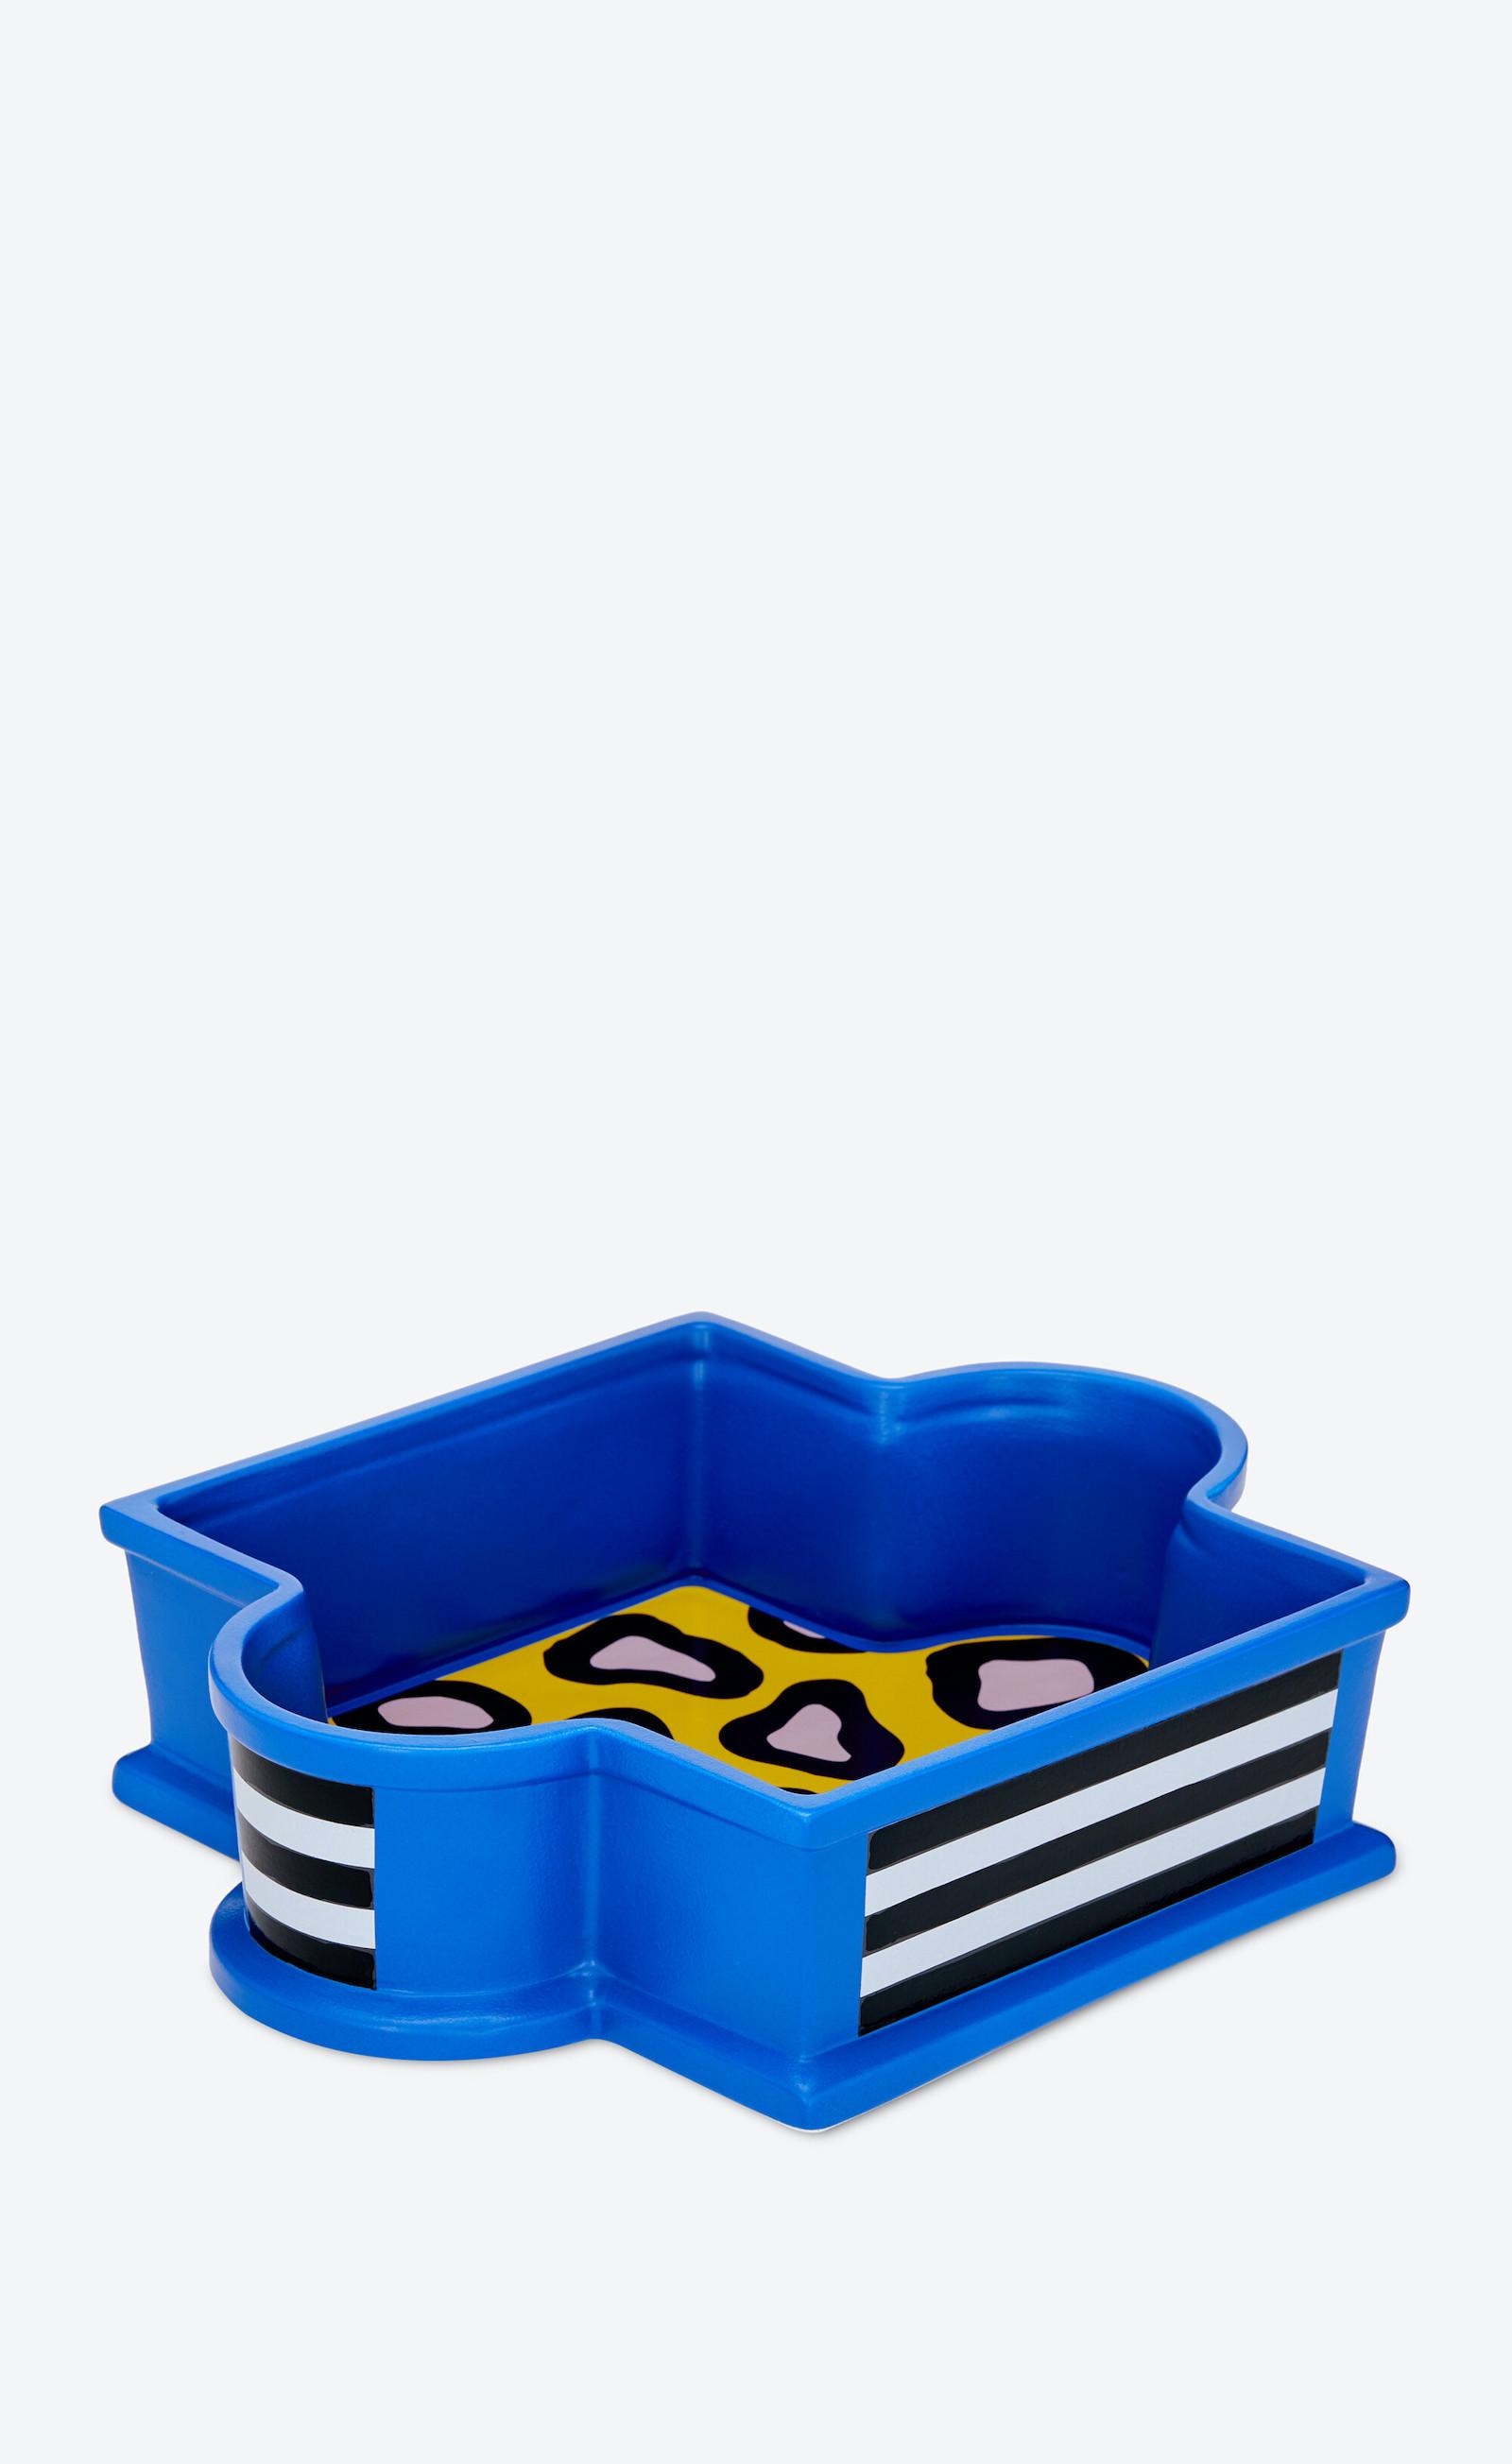 square-shaped tray in royal blue, with two semi-circles to hold. Black and white stripes adorn the sides on parts of the tray. On the interior, it has a yellow, pink, and black leopard print surface. 